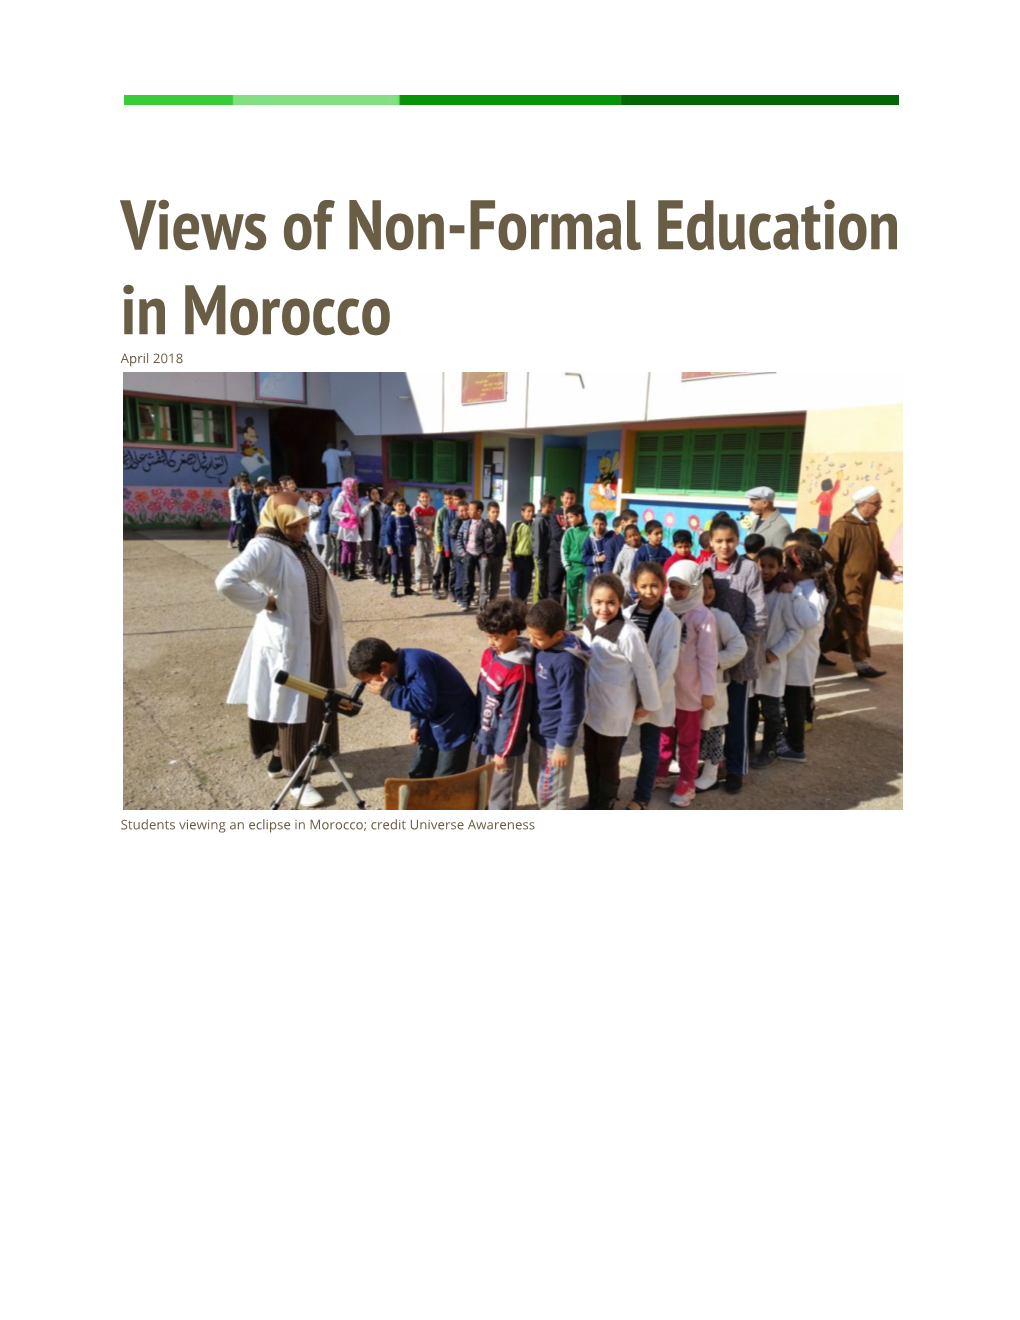 Views of Non-Formal Education in Morocco April 2018